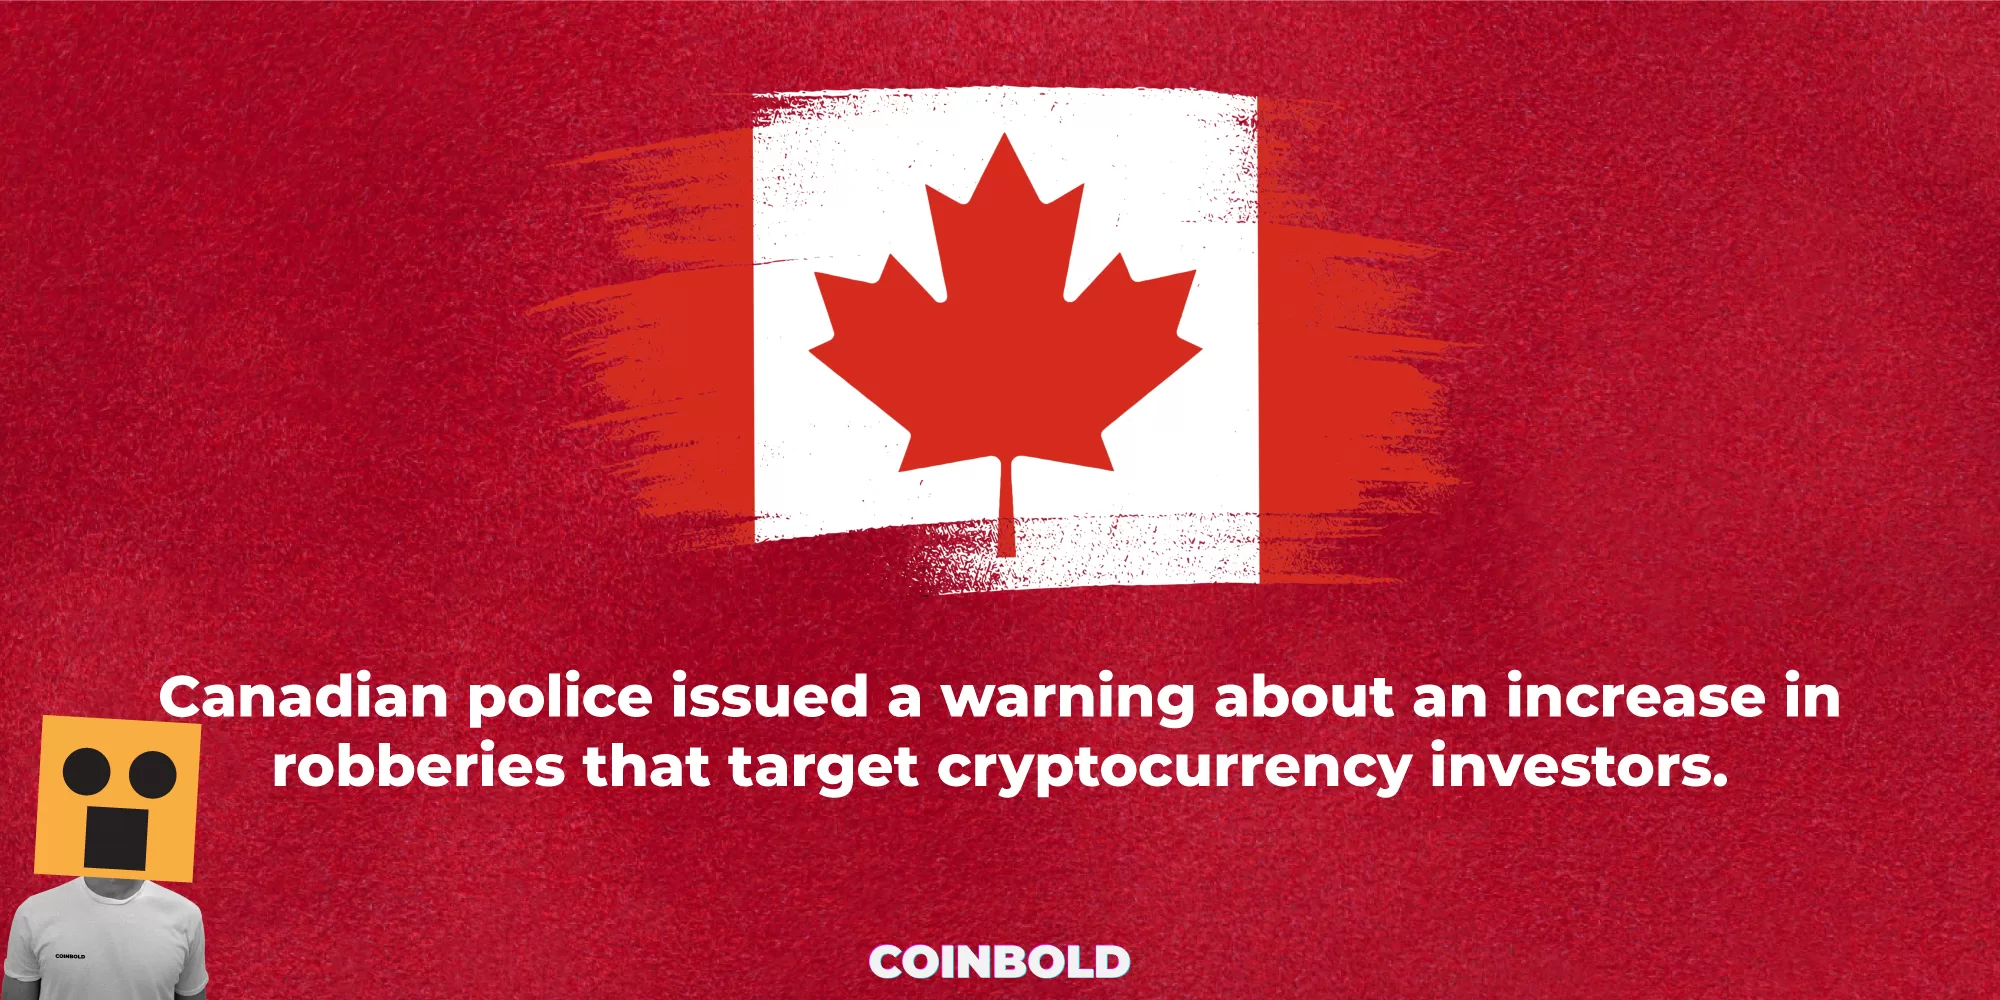 Canadian police issued a warning about an increase in robberies that target cryptocurrency investors.